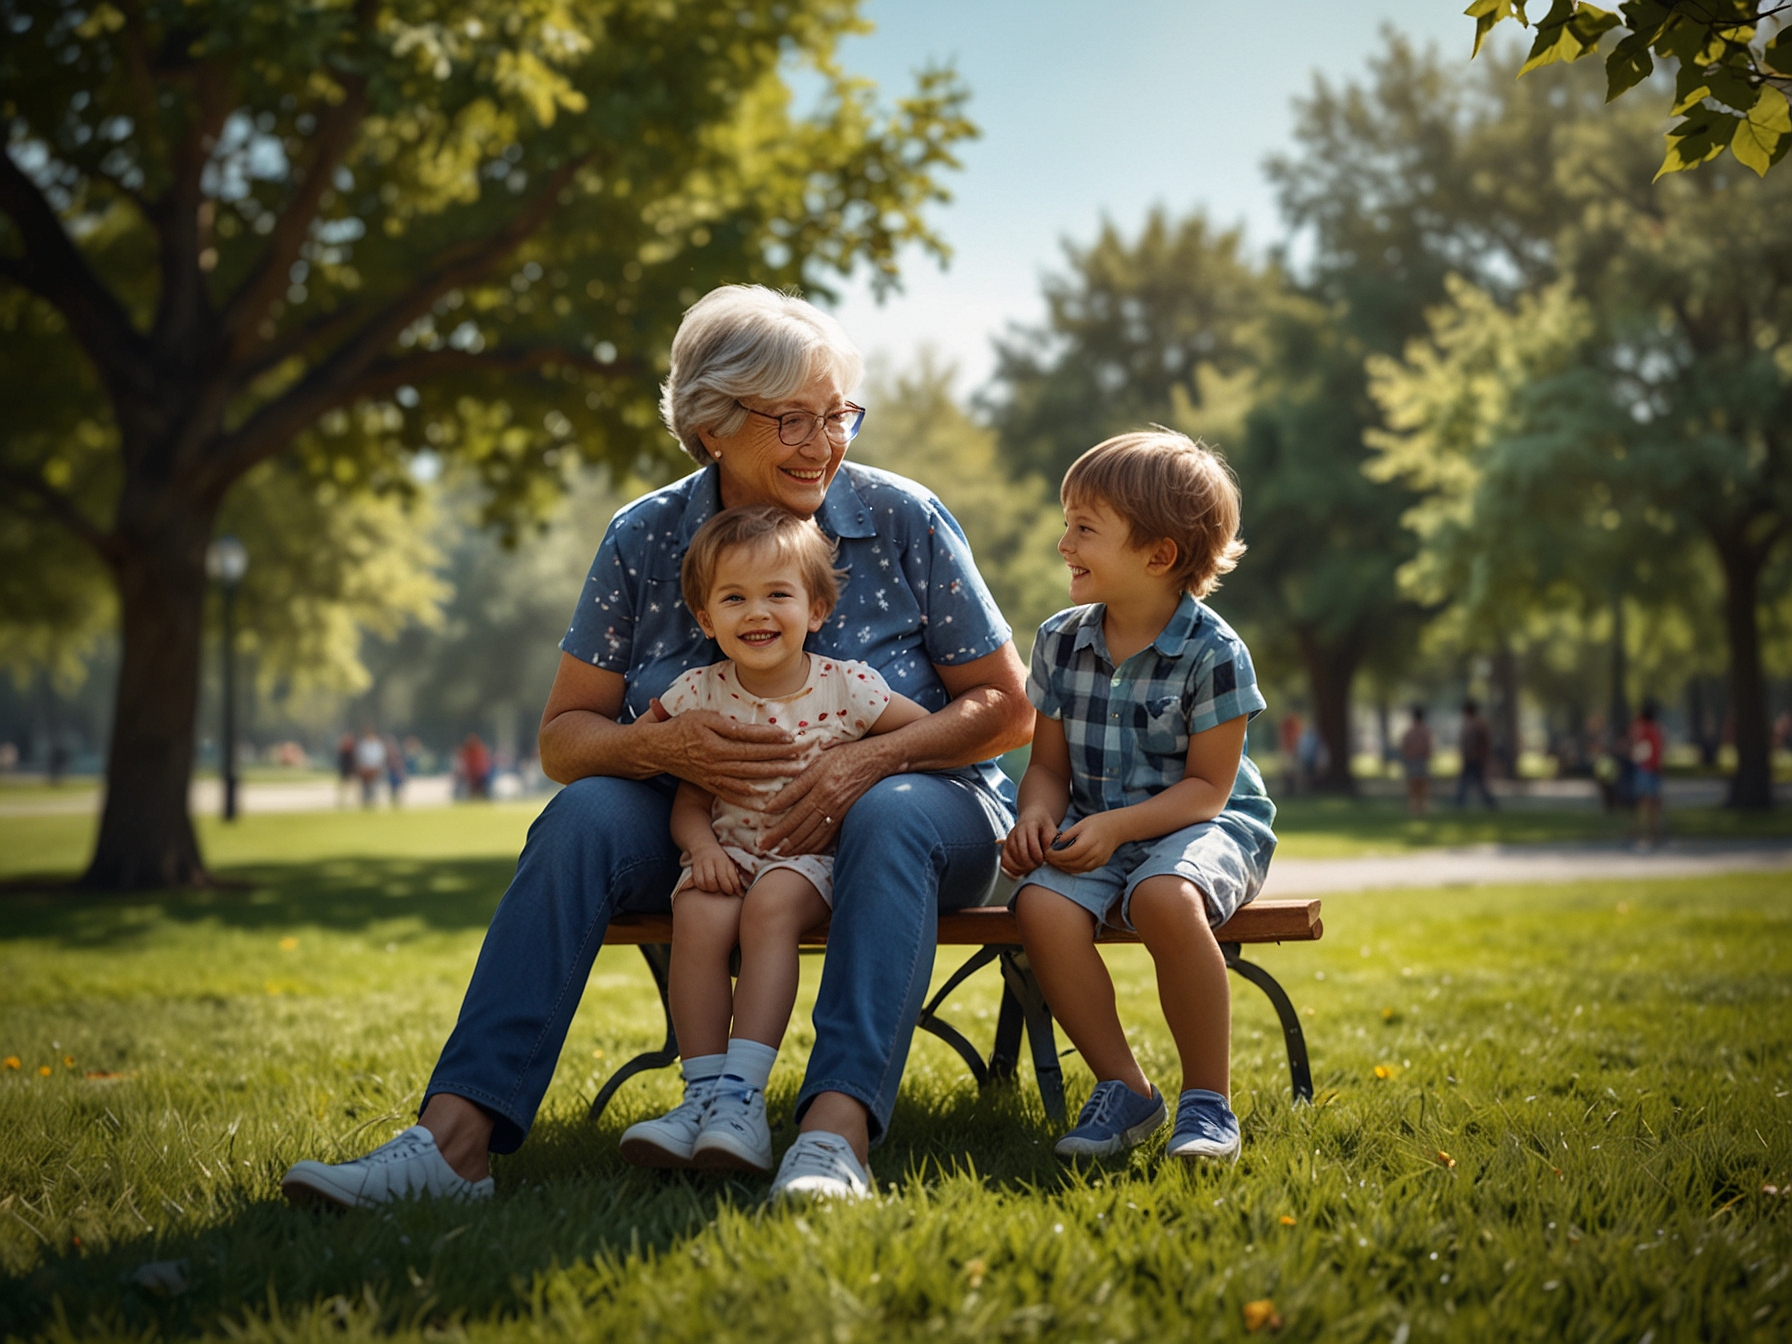 A grandmother playing with her three grandchildren in the park, highlighting the joy of spending quality time together and the potential financial burden it may impose.